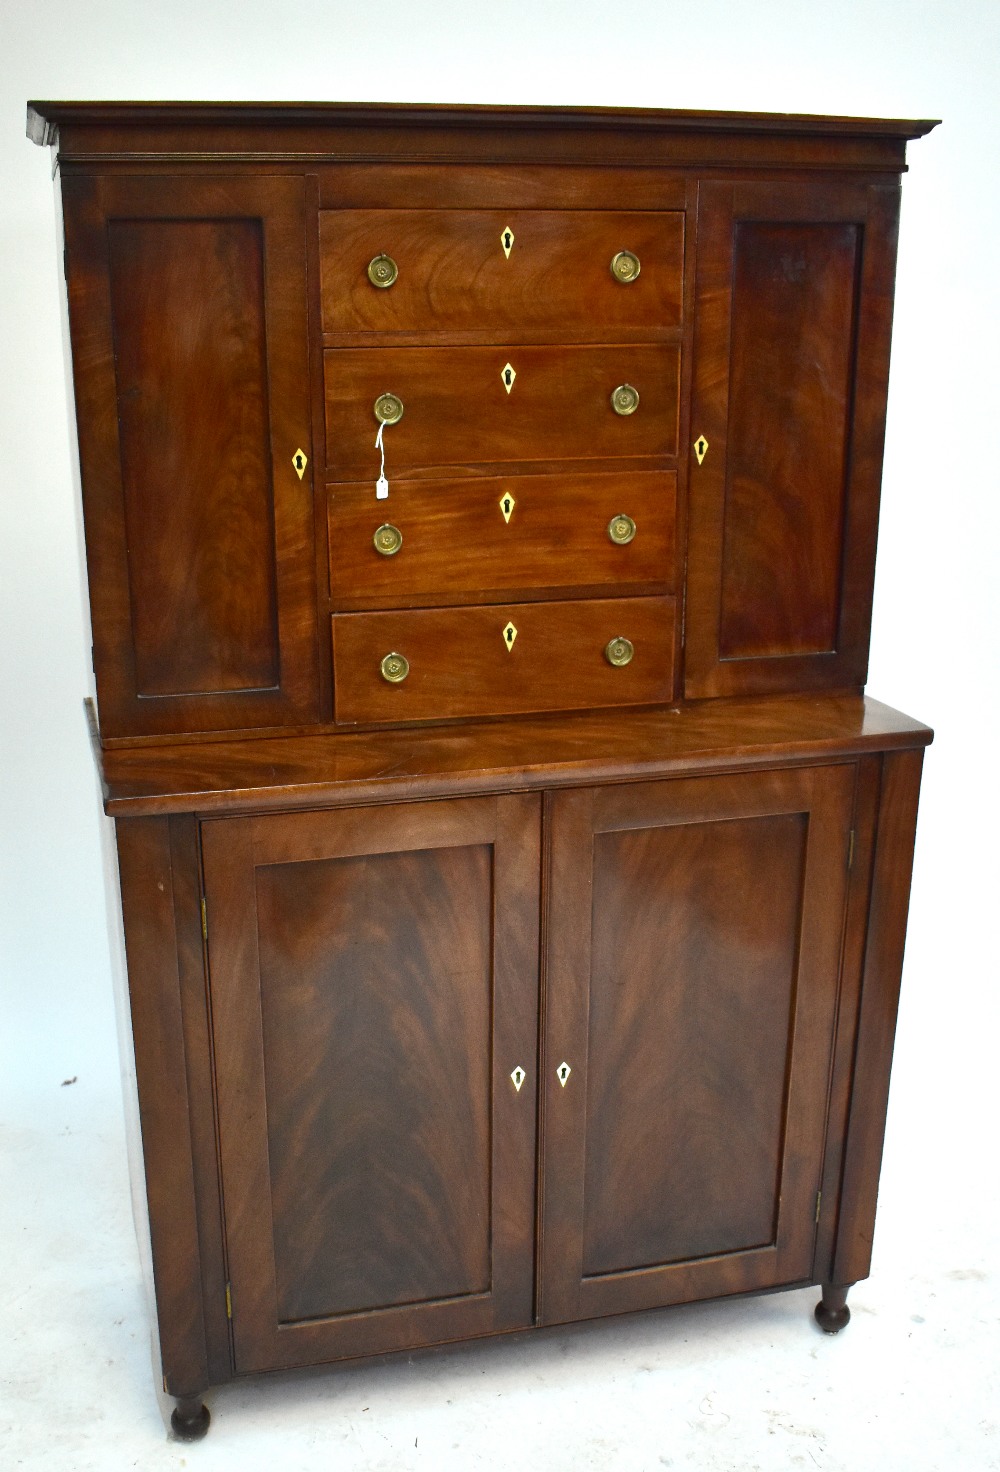 A mid-19th century mahogany side cabinet, the upper section with four drawers and two cupboard doors